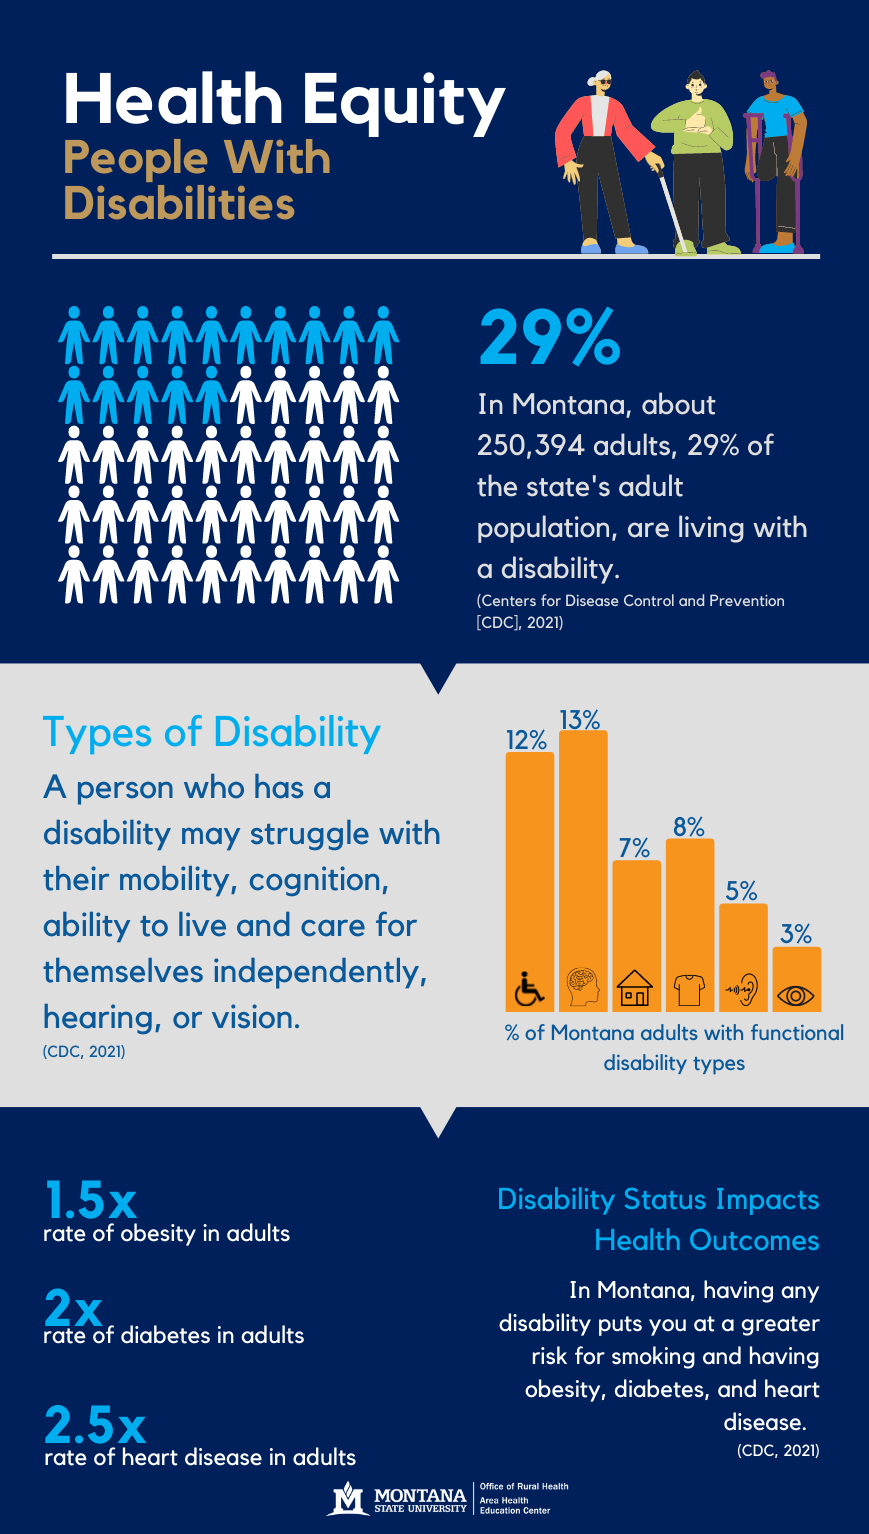 Health Equity - People with Disabilities. In Montana, about 250,394 adults, 29% of the state's adult population, are living with a disability. (Centers for Disease Control and Prevention [CDC], 2021). Types of Disability - A person who has a disability may struggle with their mobility, cognition, ability to live and care for themselves independently, hearing, or vision.  (CDC, 2021). % of Montana adults with functional disability types: 12% wheelchair, 13% cognitive, 7% live independently, 8% care for themselves independently, 5% hearing, 3% visualDisability Status Impacts Health Outcomes - In Montana, having any disability puts you at a greater risk for smoking and having obesity, diabetes, and heart disease.   (CDC, 2021). 1.5x rate of obesity in adults. 2x rate of diabetes in adults. 2.5x rate of heart disease in adults. 